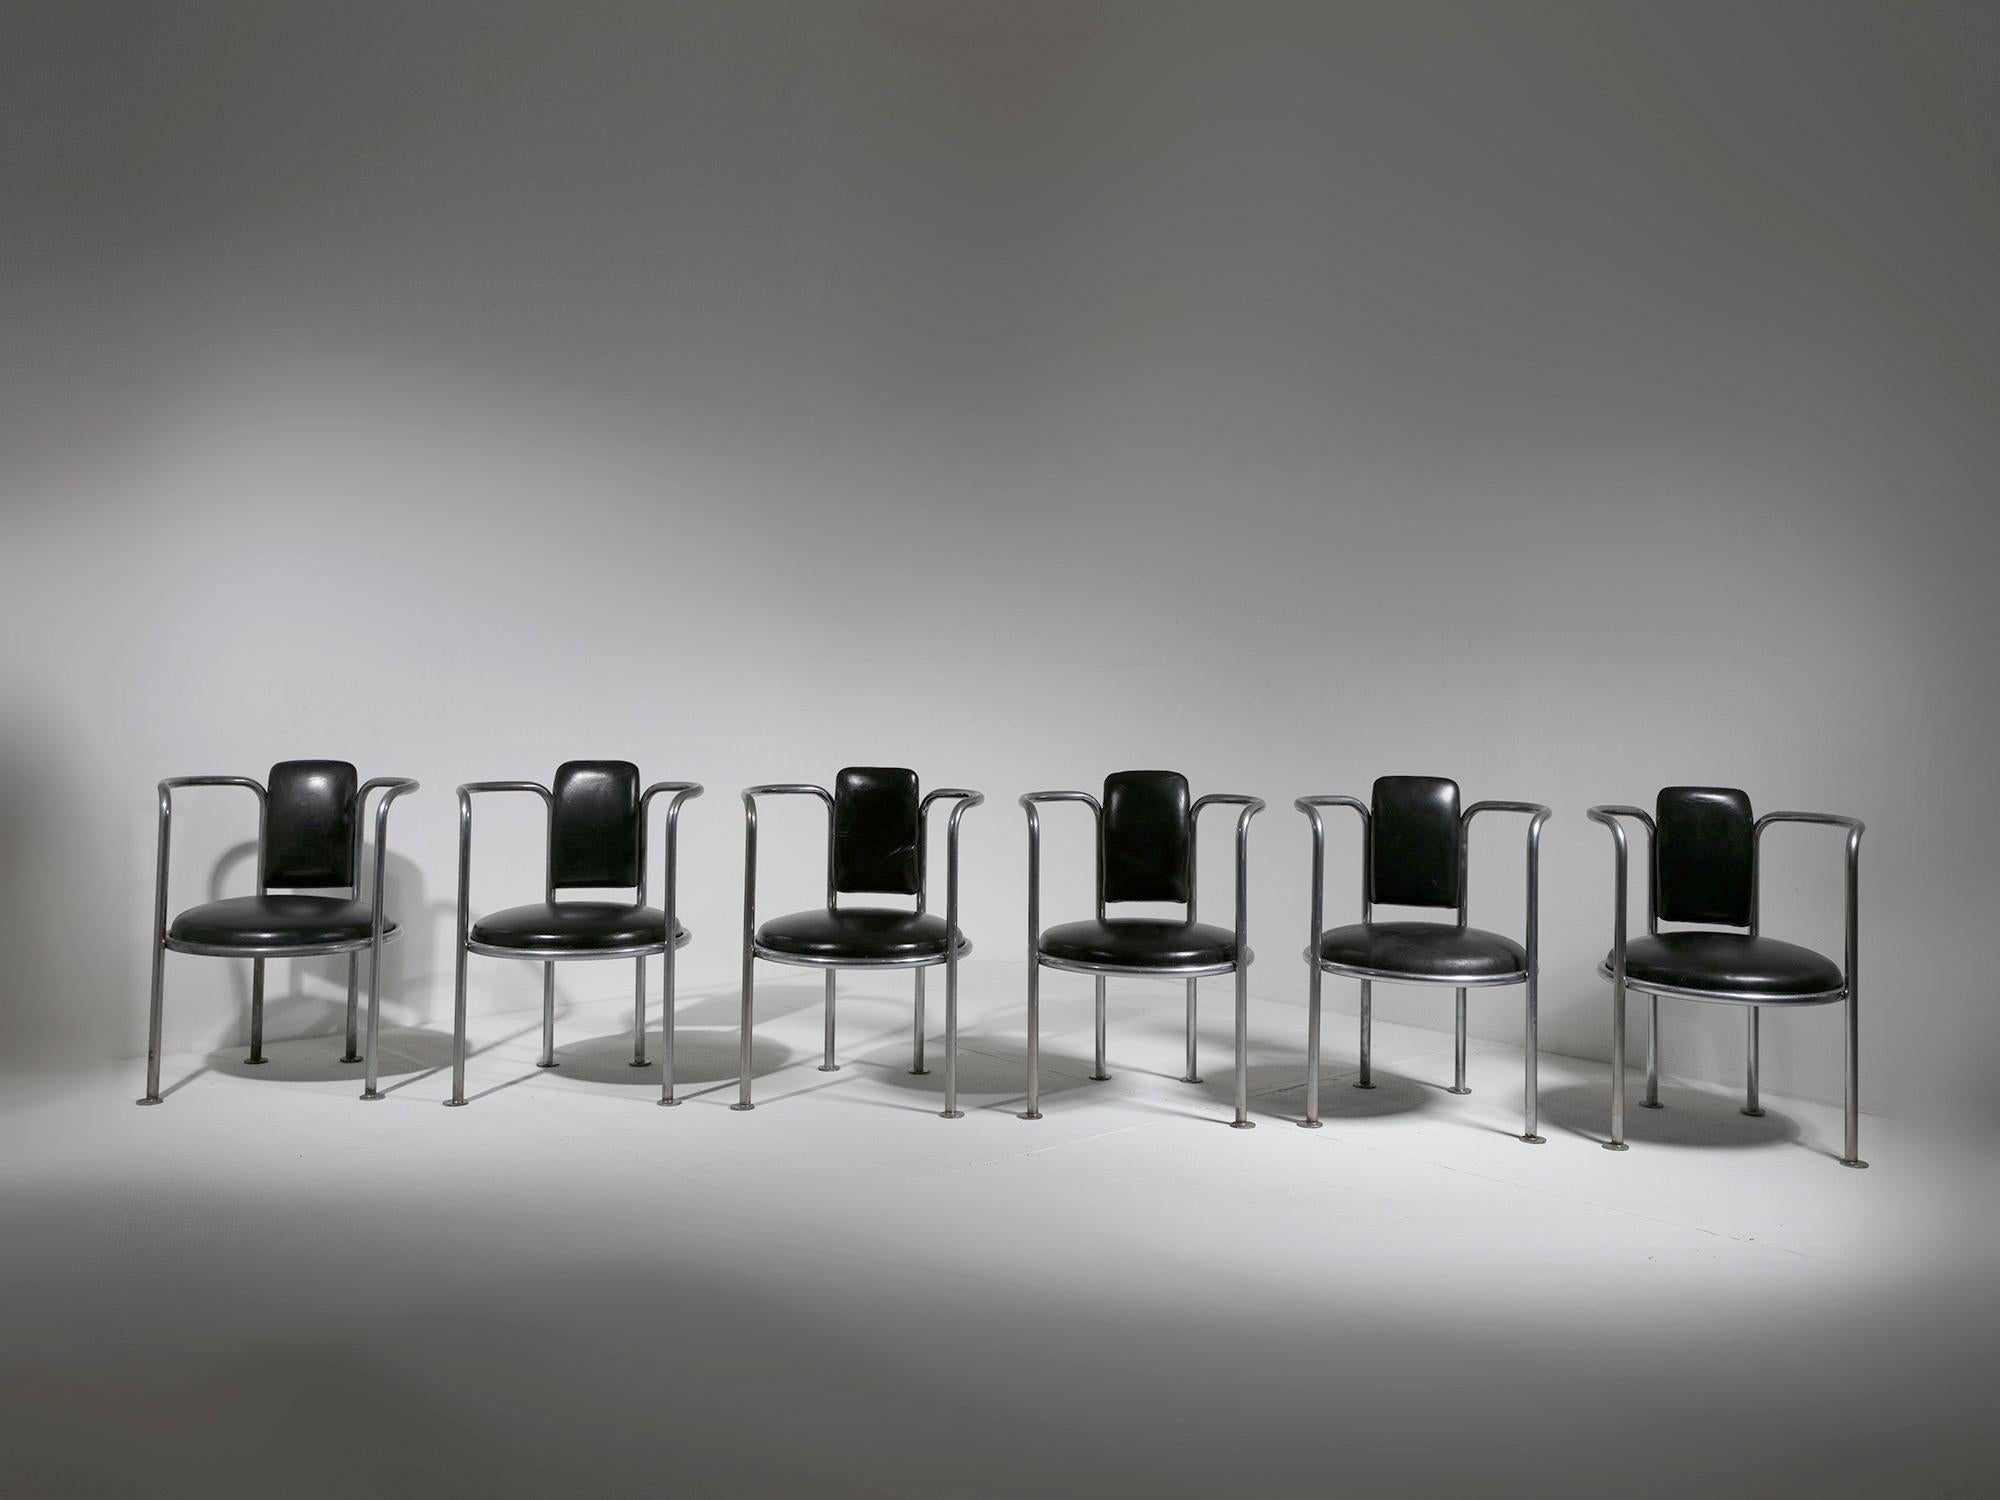 10 Chrome Black Leather Armchairs in the style of Gae Aulenti Poltronova, 1960s For Sale 3